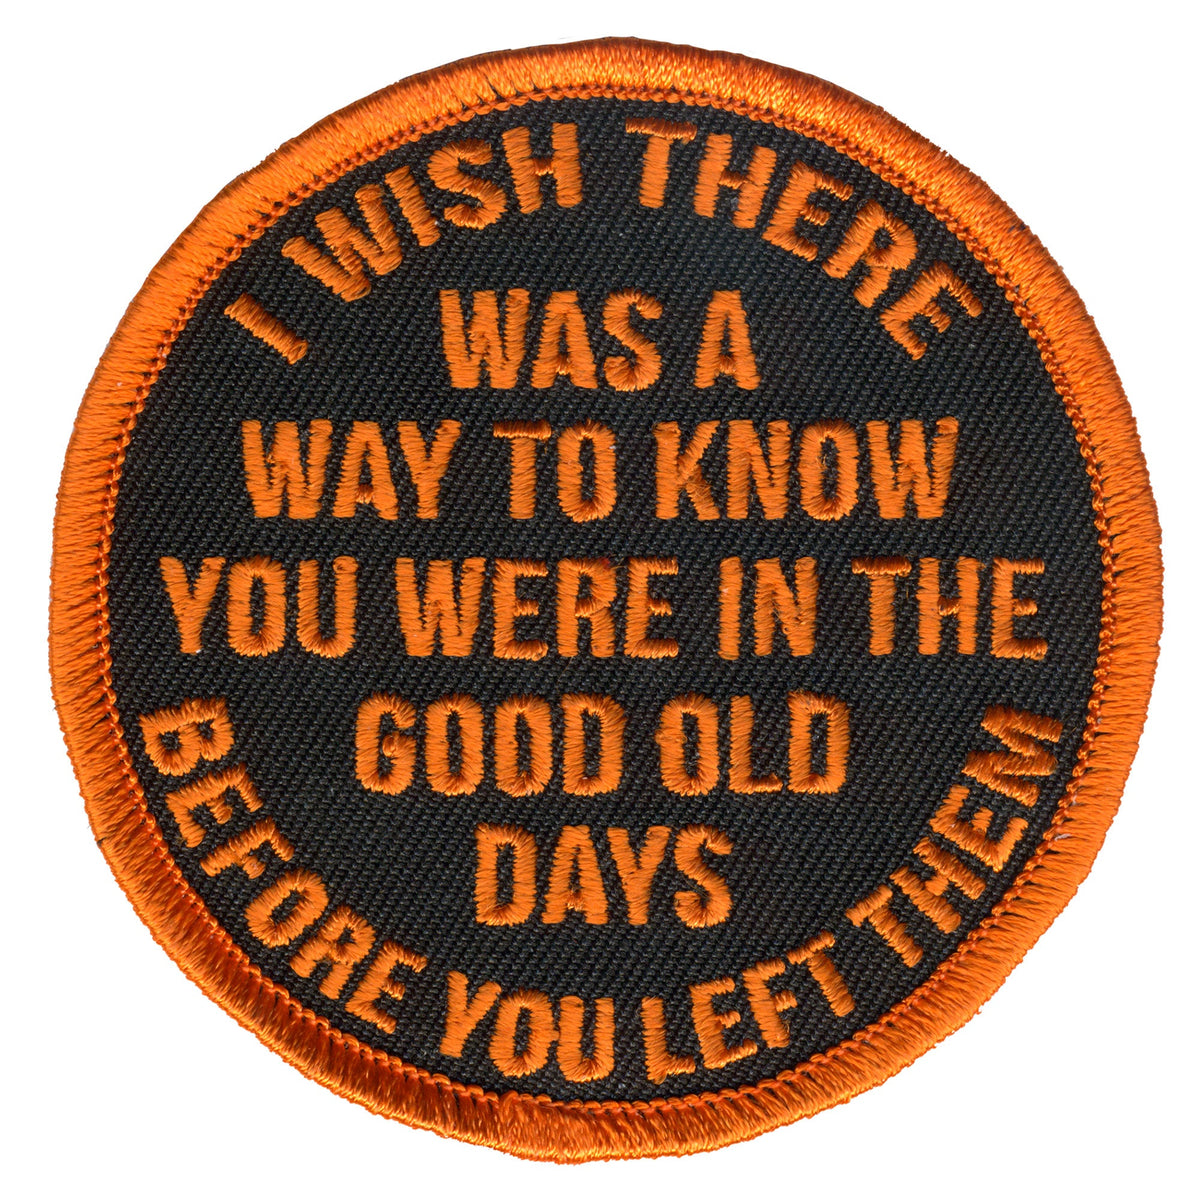 Hot Leathers Good Old Days 3" X 3" Patch